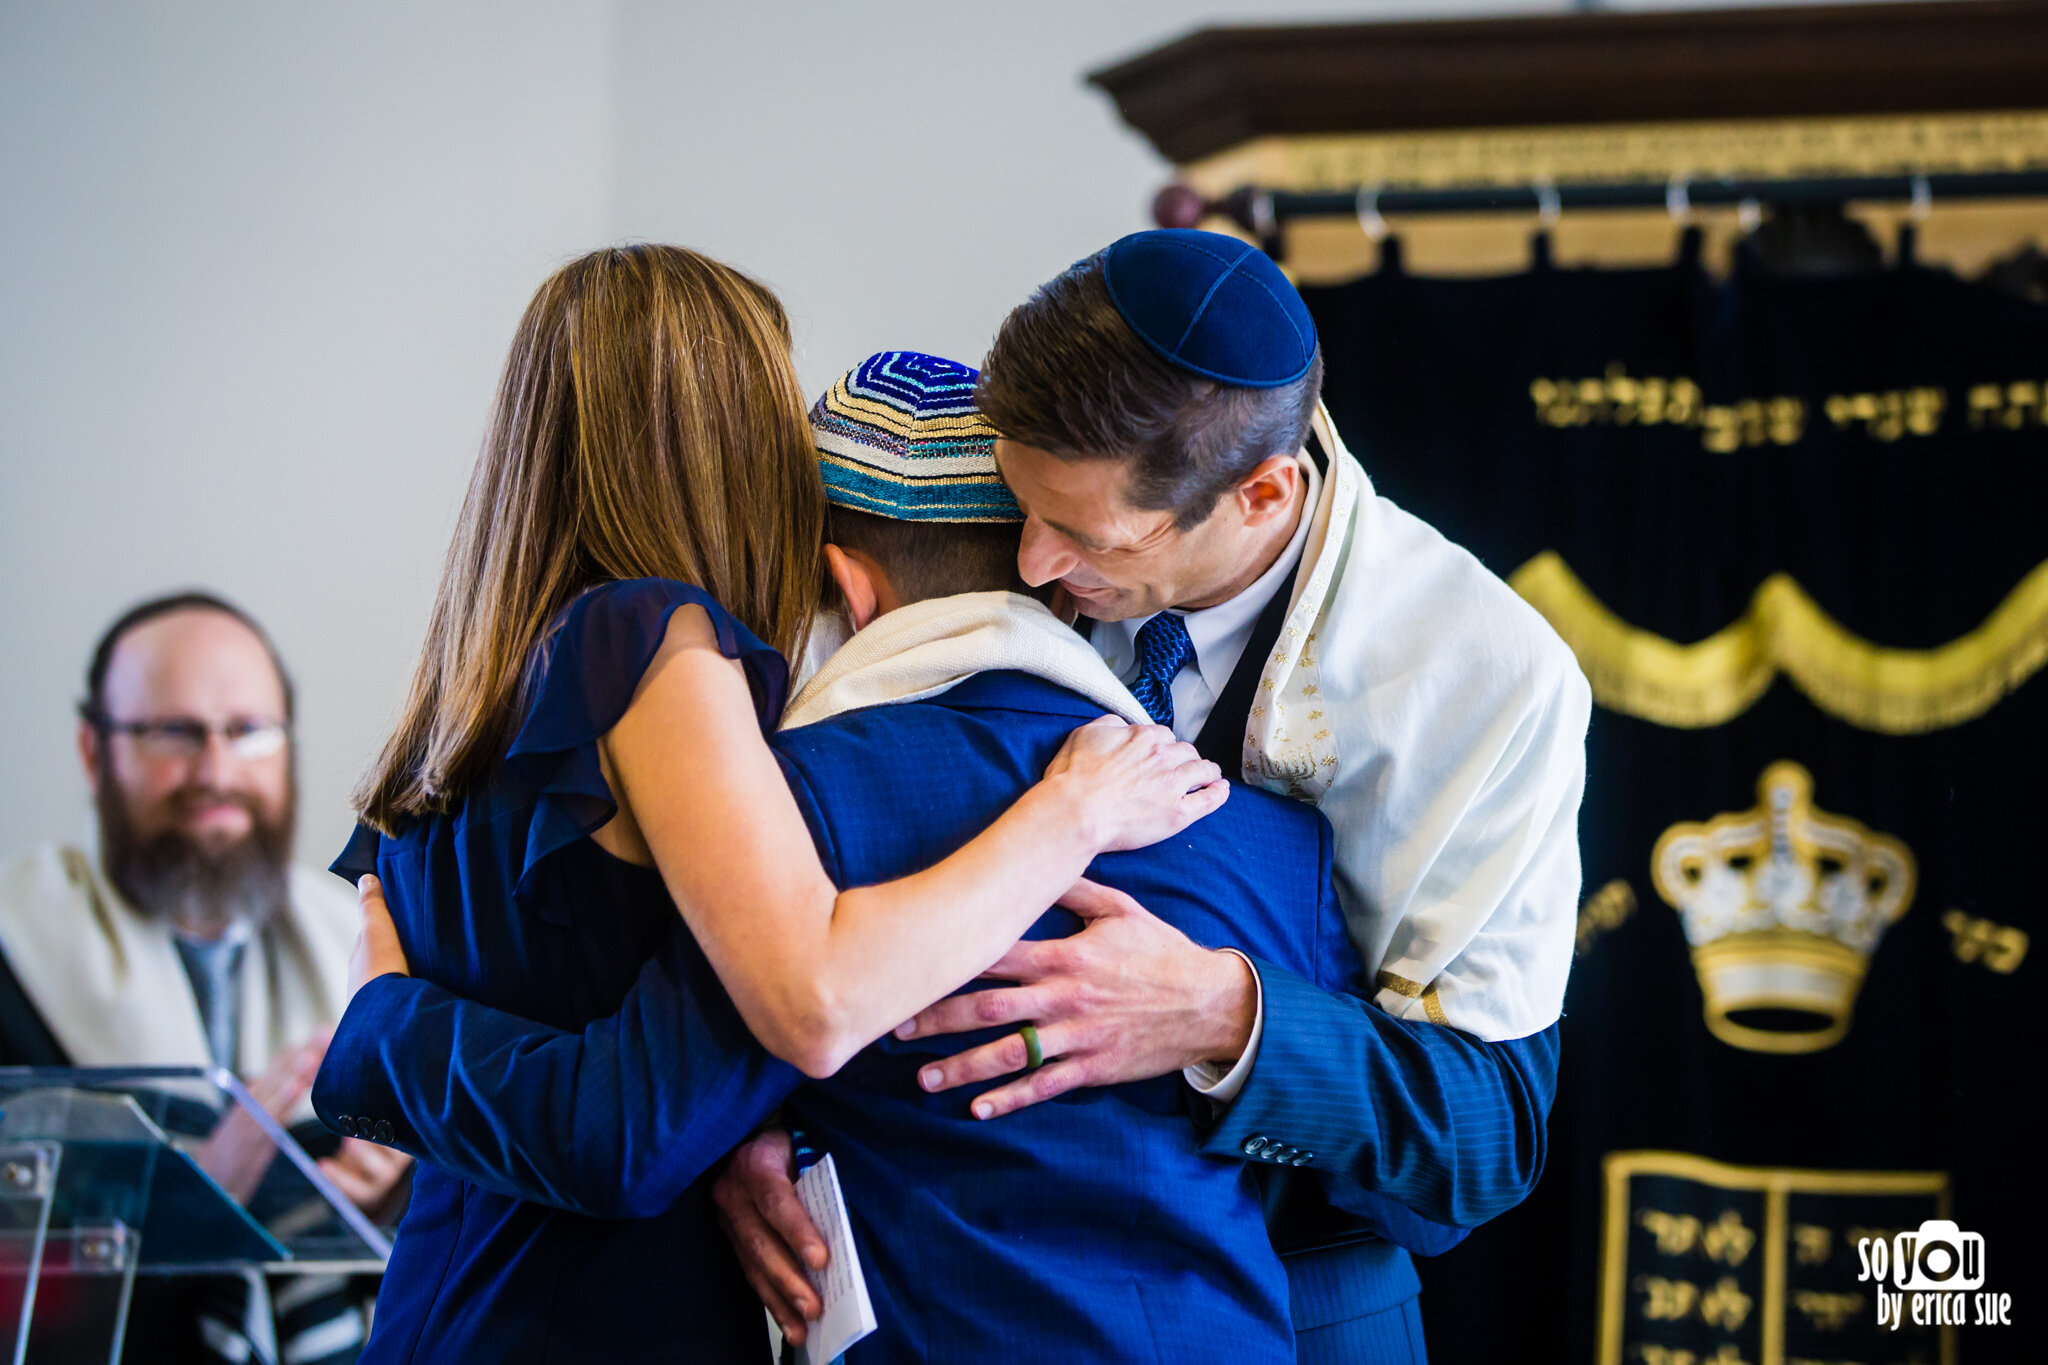 19-so-you-by-erica-sue-chabad-parkland-bar-mitzvah-photographer-9580.JPG